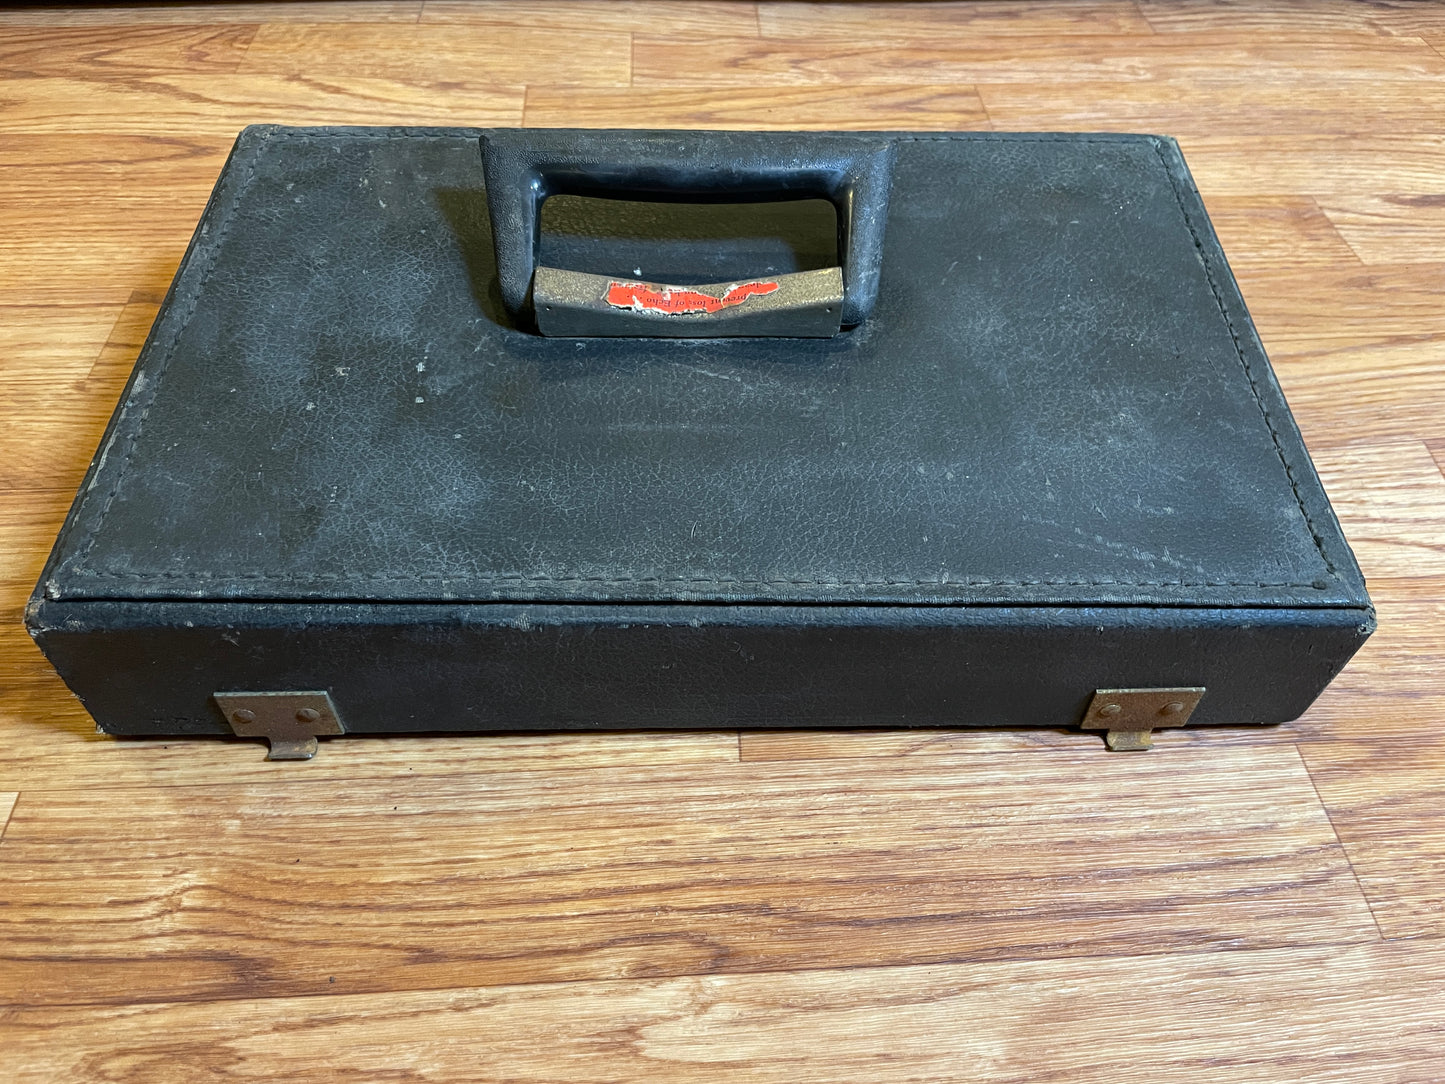 Maestro Echoplex Lid For Smaller Solid State Tape Unit